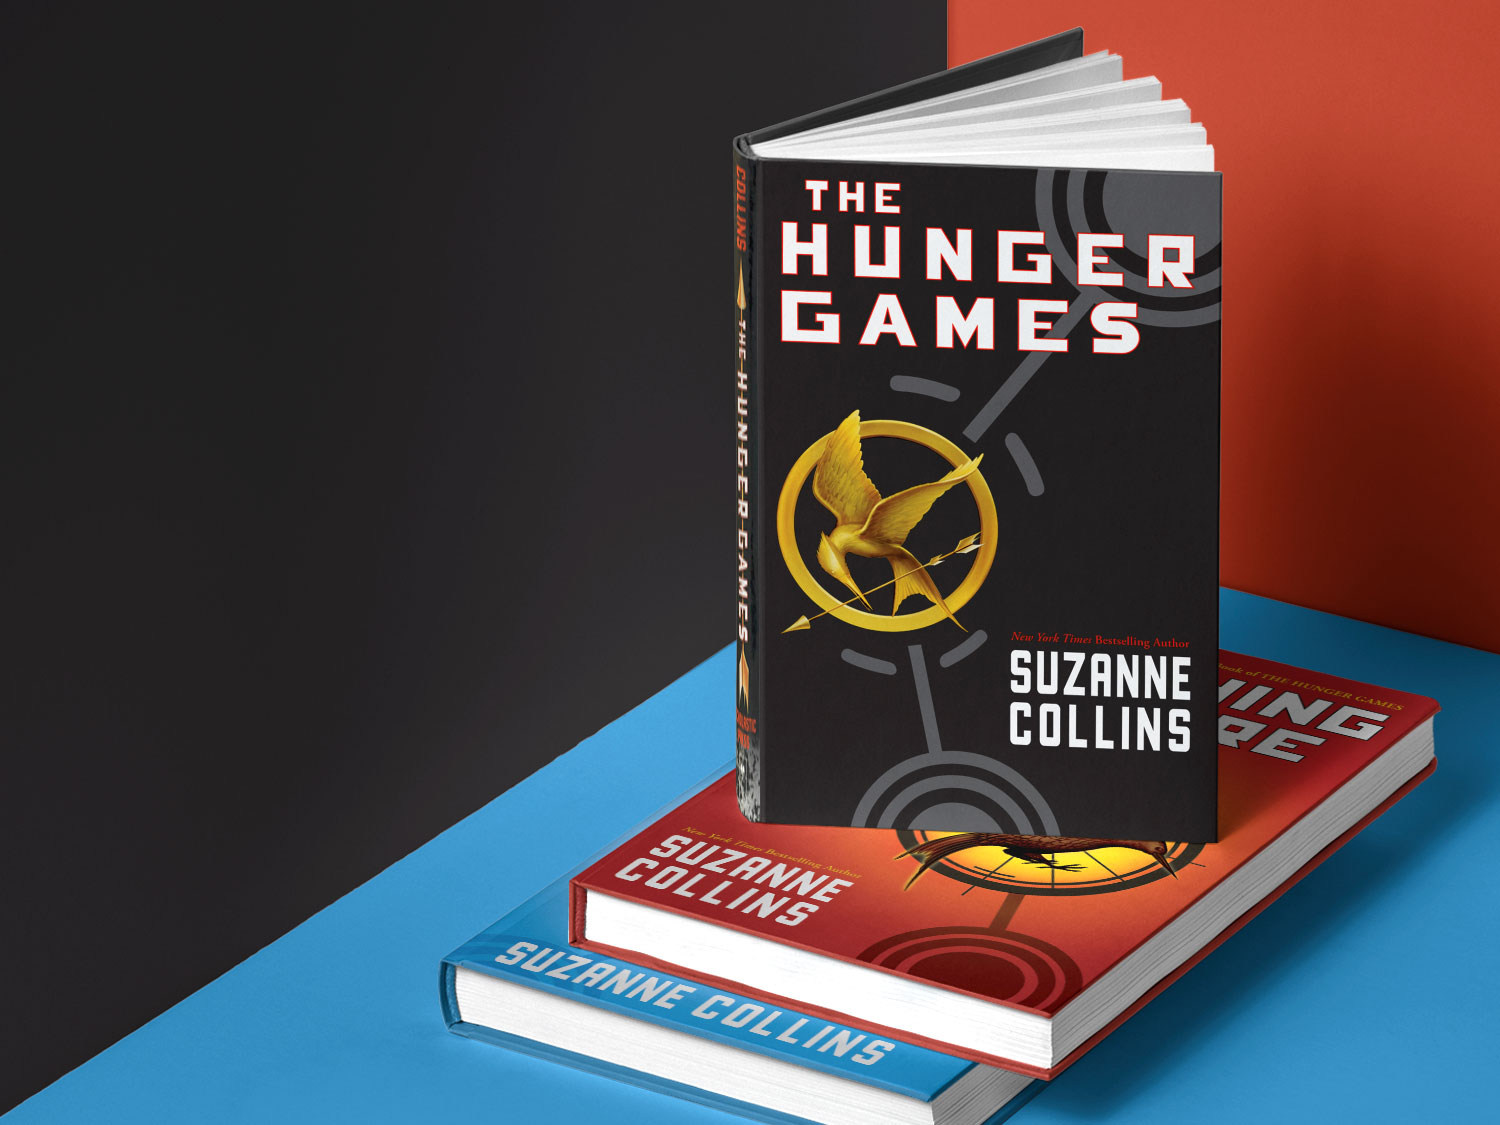 Scholastic on X: Rediscover the series that set the world on fire. Enter  now for a chance to win the 10th anniversary box set of The Hunger Games,  with brand new content